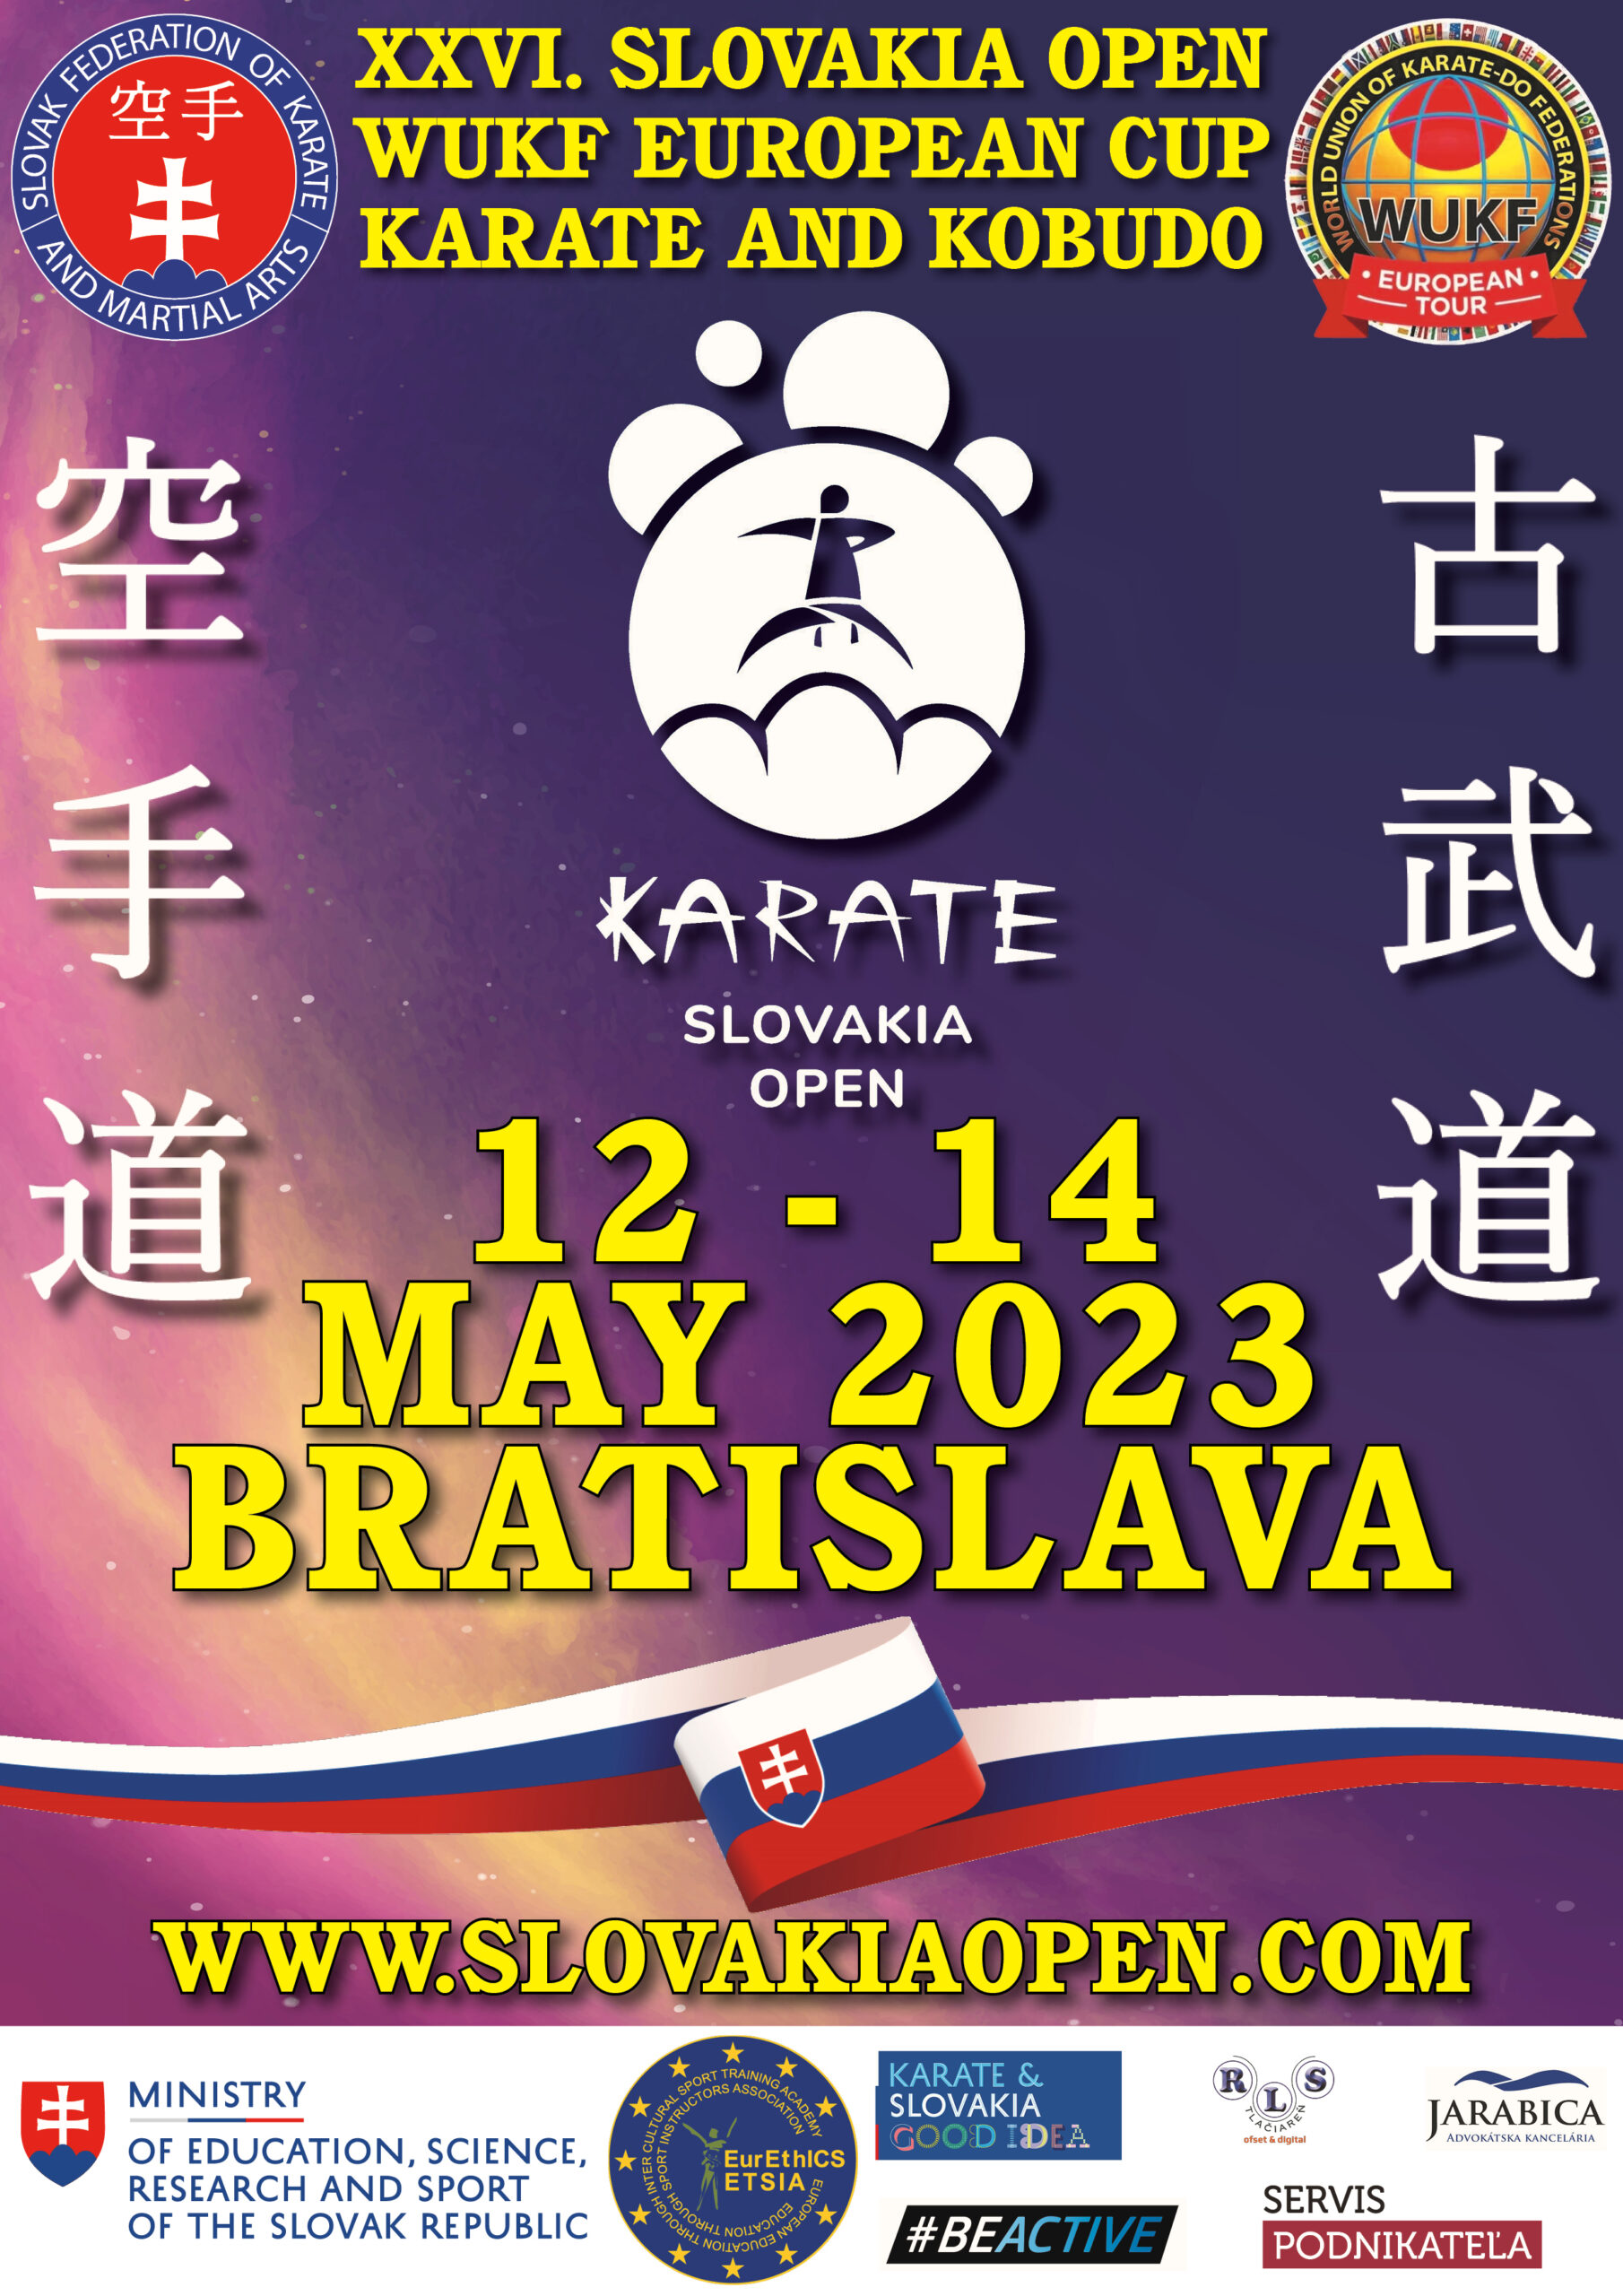 https://karate-slovakia.sk/wp-content/uploads/poster_A4_ver02-scaled.jpg